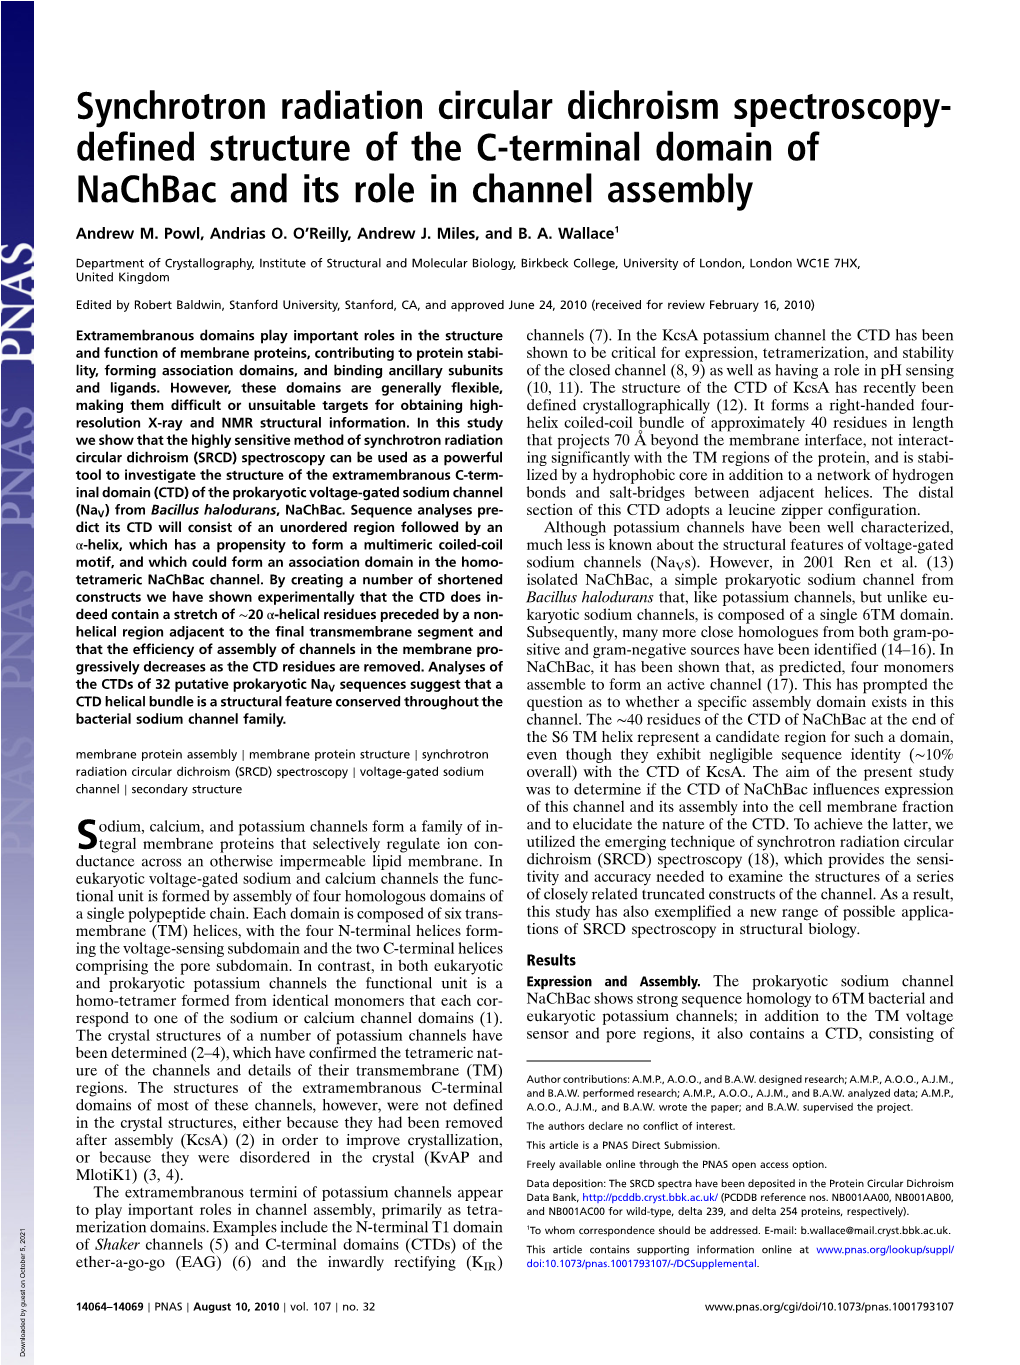 Synchrotron Radiation Circular Dichroism Spectroscopy- Defined Structure of the C-Terminal Domain of Nachbac and Its Role in Channel Assembly